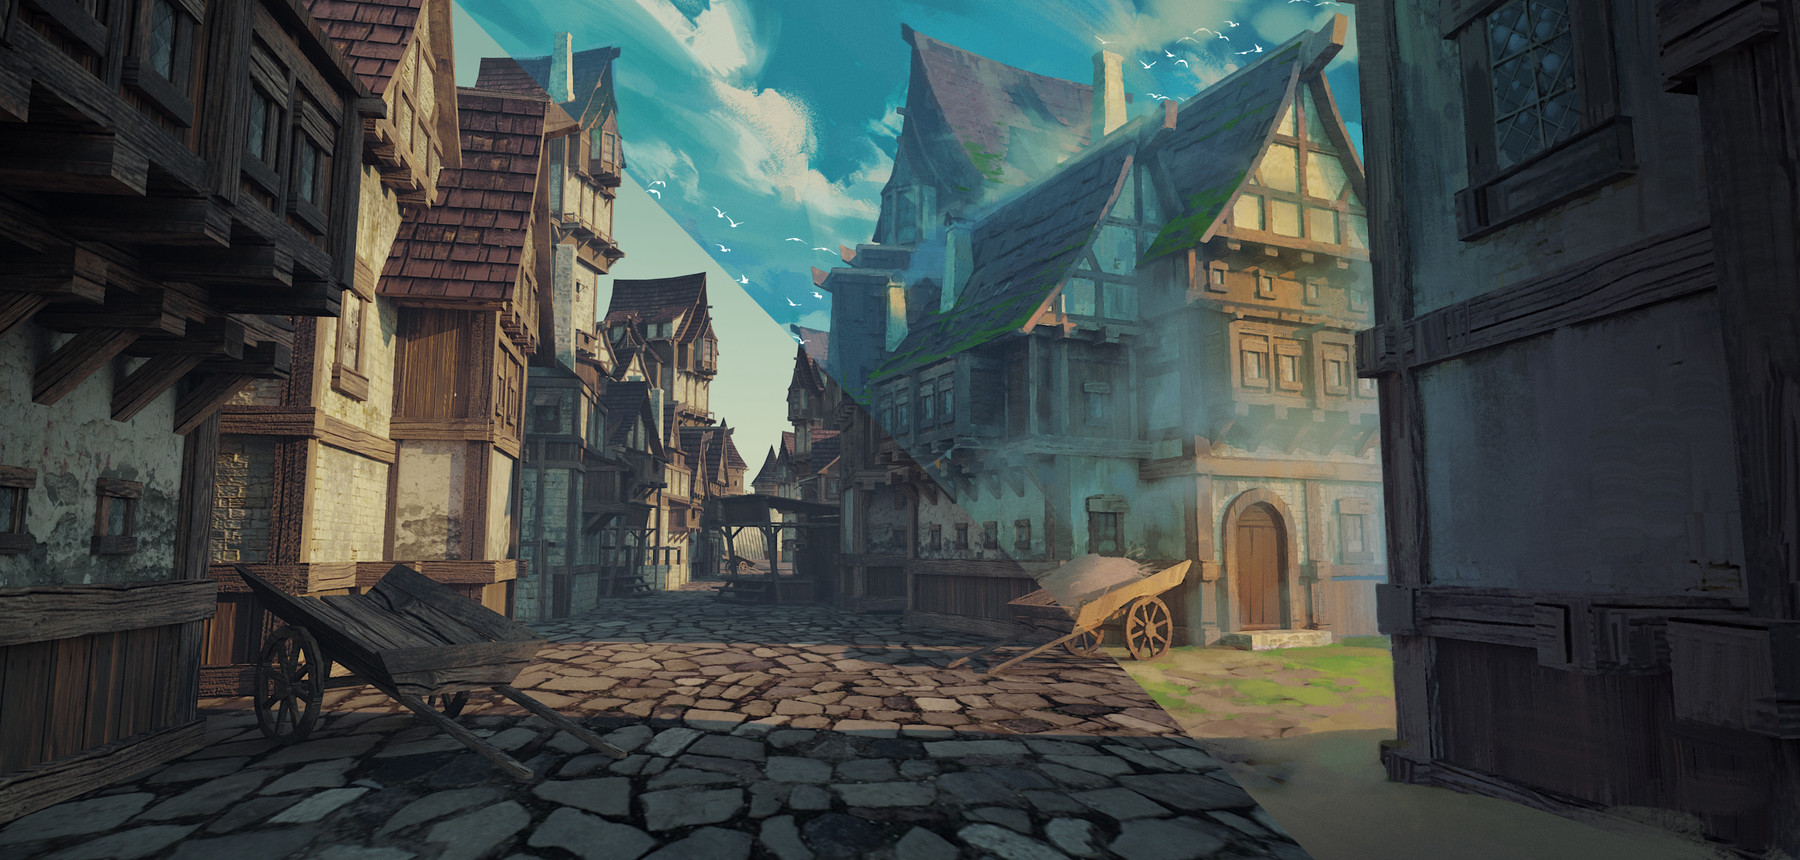 ArtStation - Environment concept art with 3d (Medieval town) | Tutorials